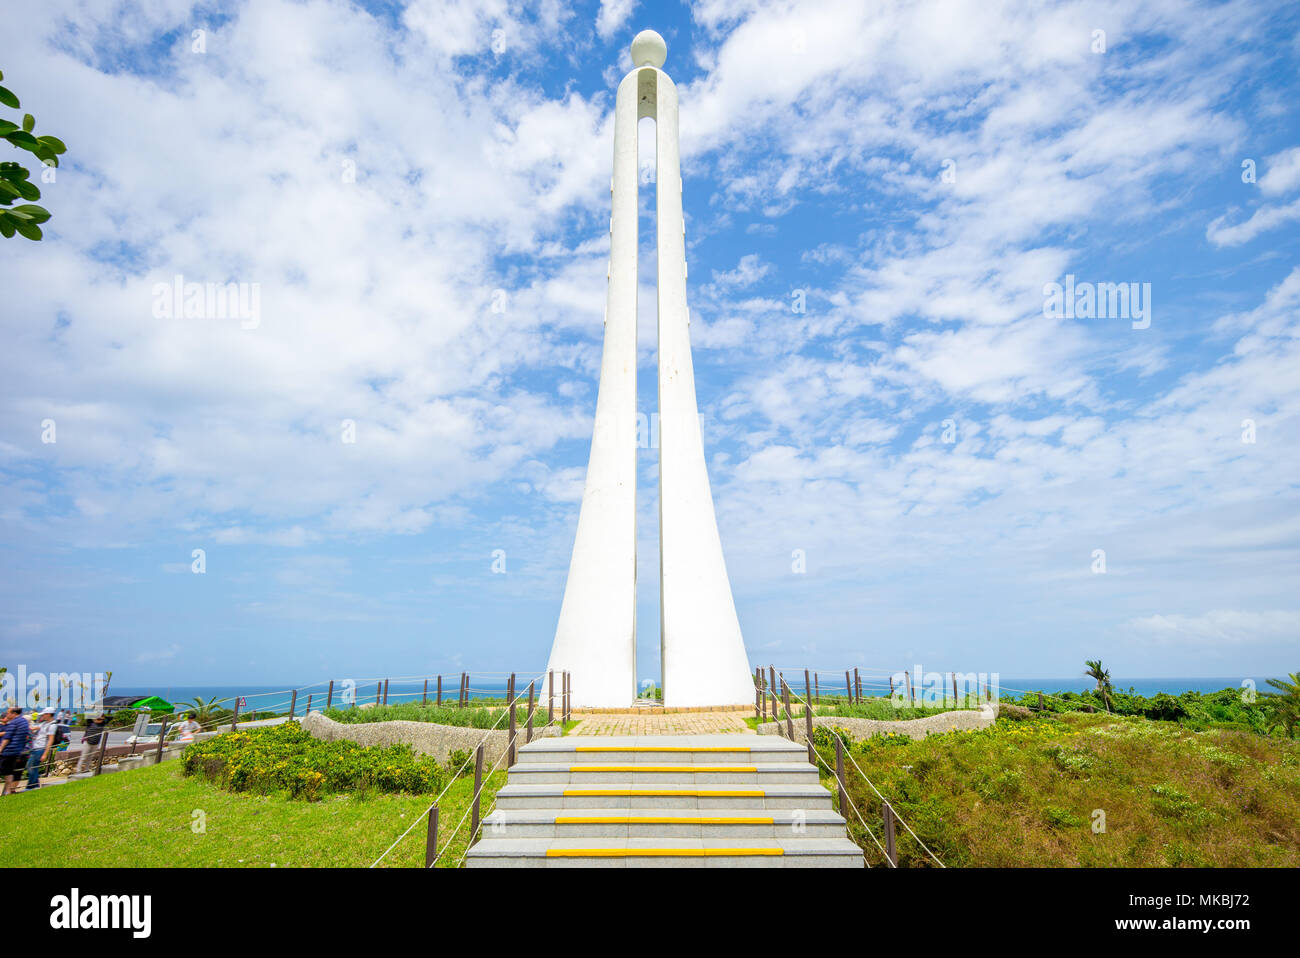 The Tropic of Cancer Marker at Hualien, Taiwan Stock Photo